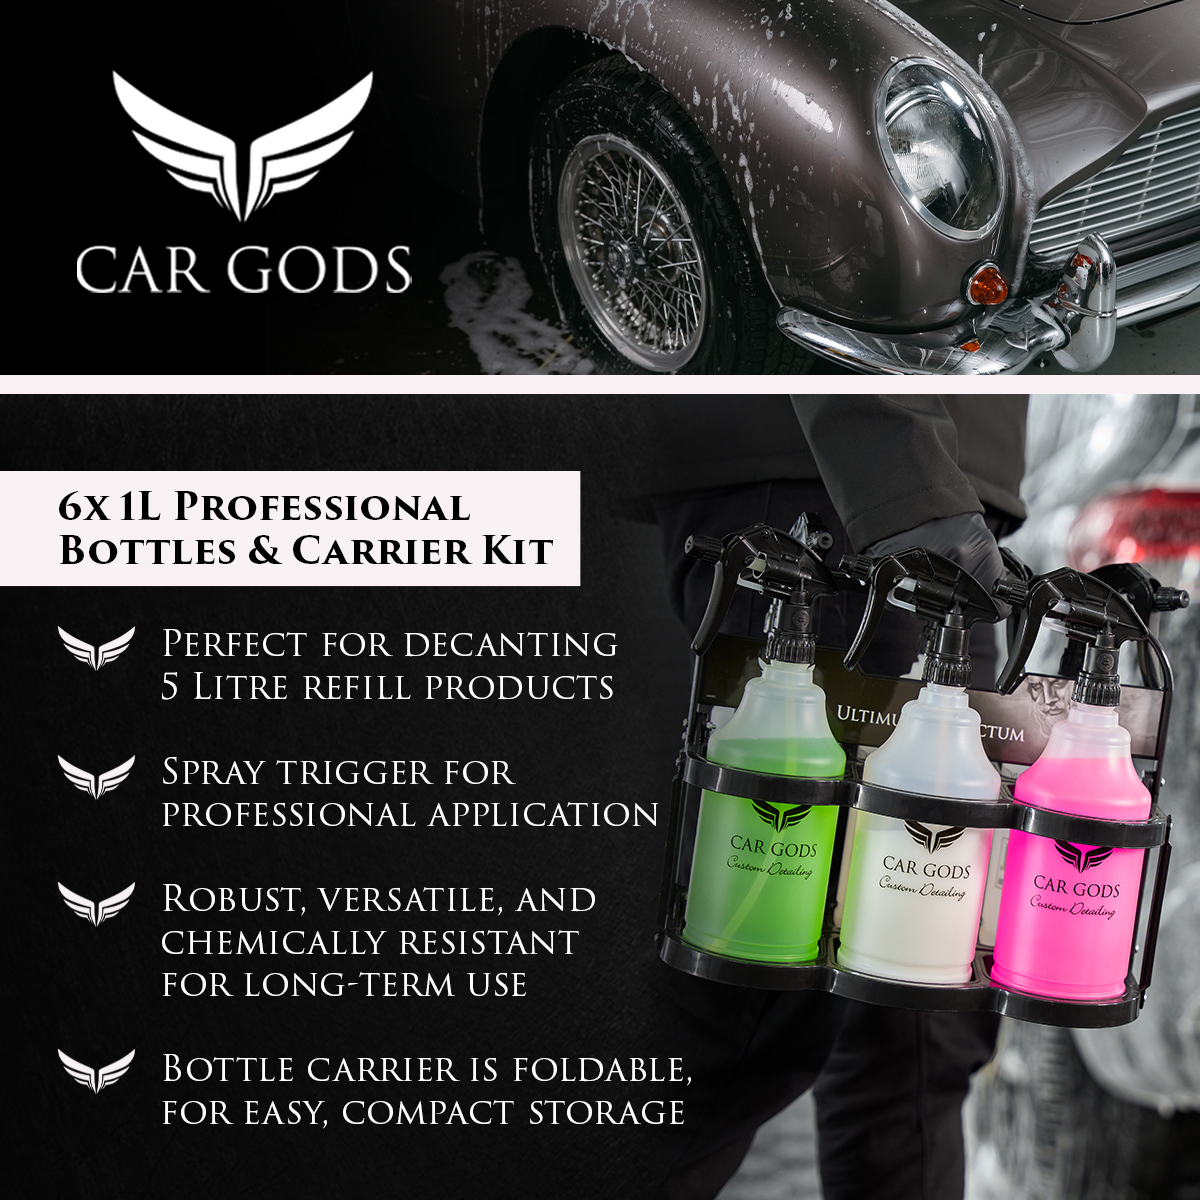 Enhance your detailing experience with Car Gods Professional Bottle & Carrier Kit. Easily pour our 5L refills into the 6 included sturdy containers. Fill level indicators ensure accuracy, while spray trigger guarantees professional application. Foldable, ergonomic carrier boasts a compact design for easy storage. Versatile and durable, this bottle and carrier kit is a must-have for efficient detailing. Elevate your car care experience with Car Gods.